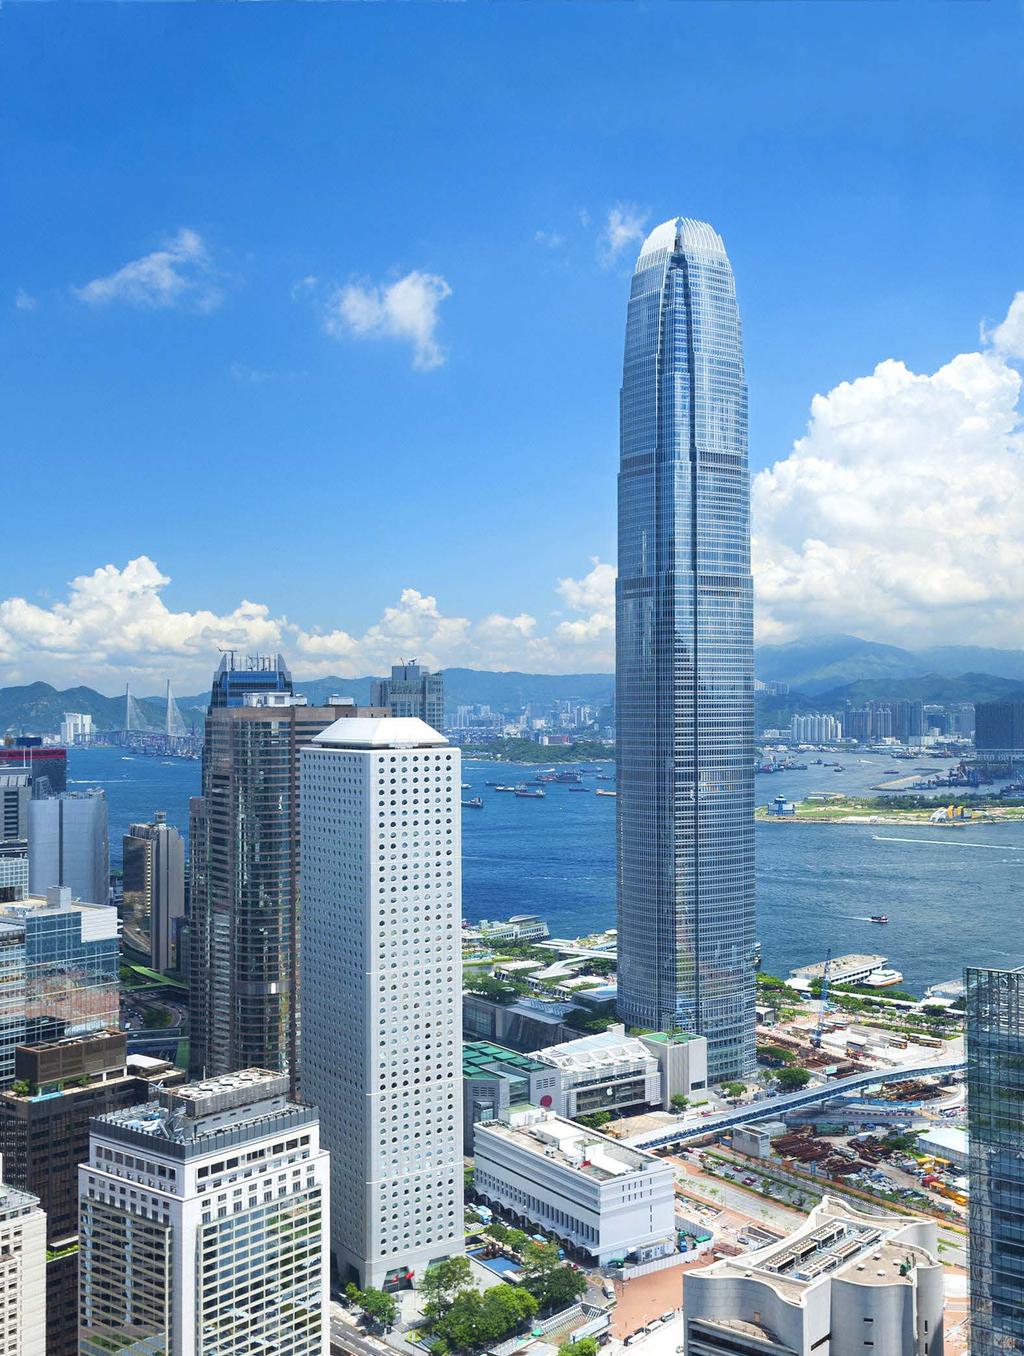 RESEARCH NOVEMBER 2015 HONG KONG MONTHLY REVIEW AND COMMENTARY ON HONG KONG'S PROPERTY MARKET Office Abundant availability to emerge